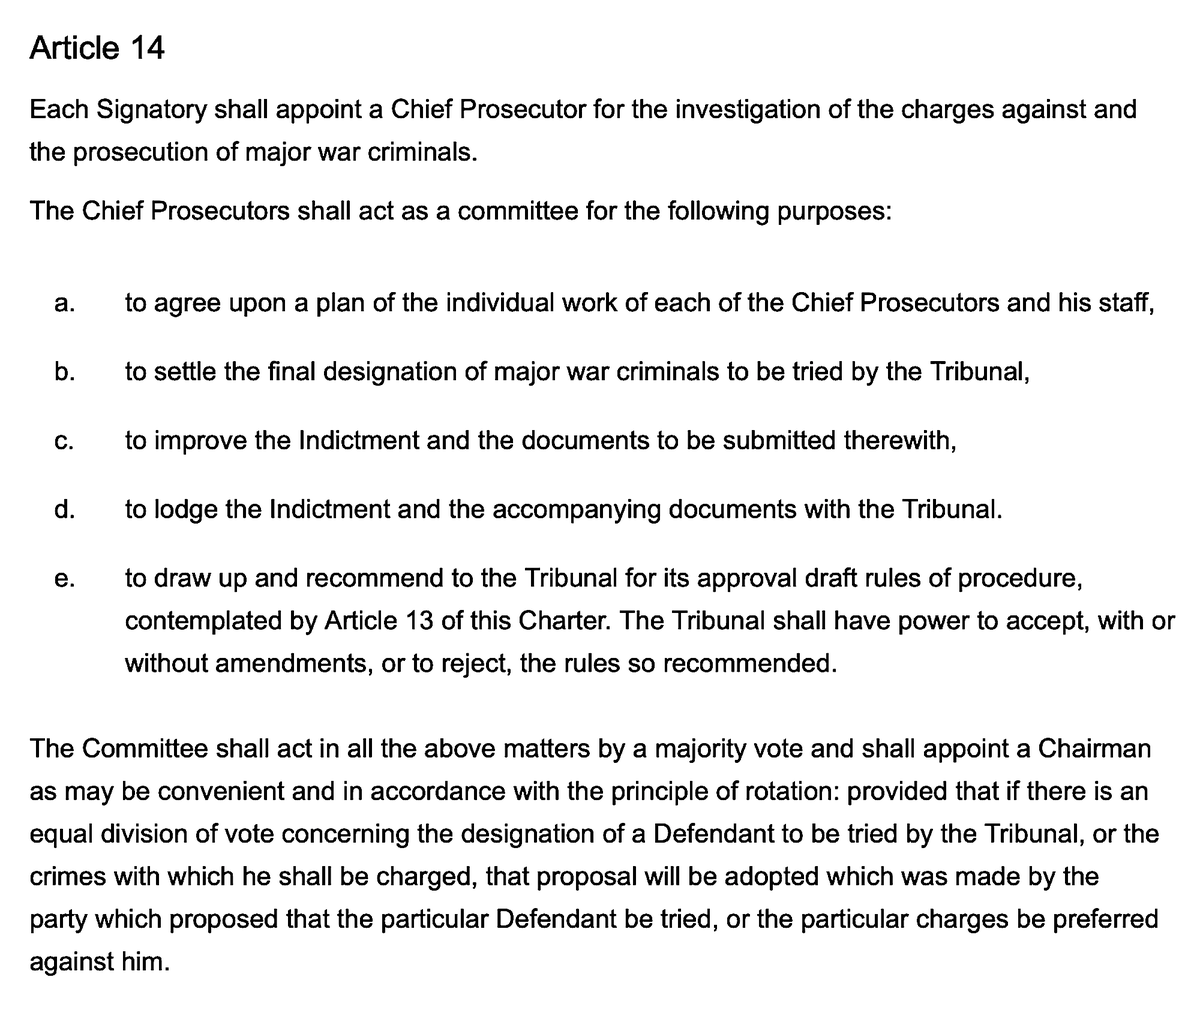 'Charter Of The International Military Tribunal''III - Committee For The Investigation And Prosecution Of Major War Criminals'Articles 14. - 15.